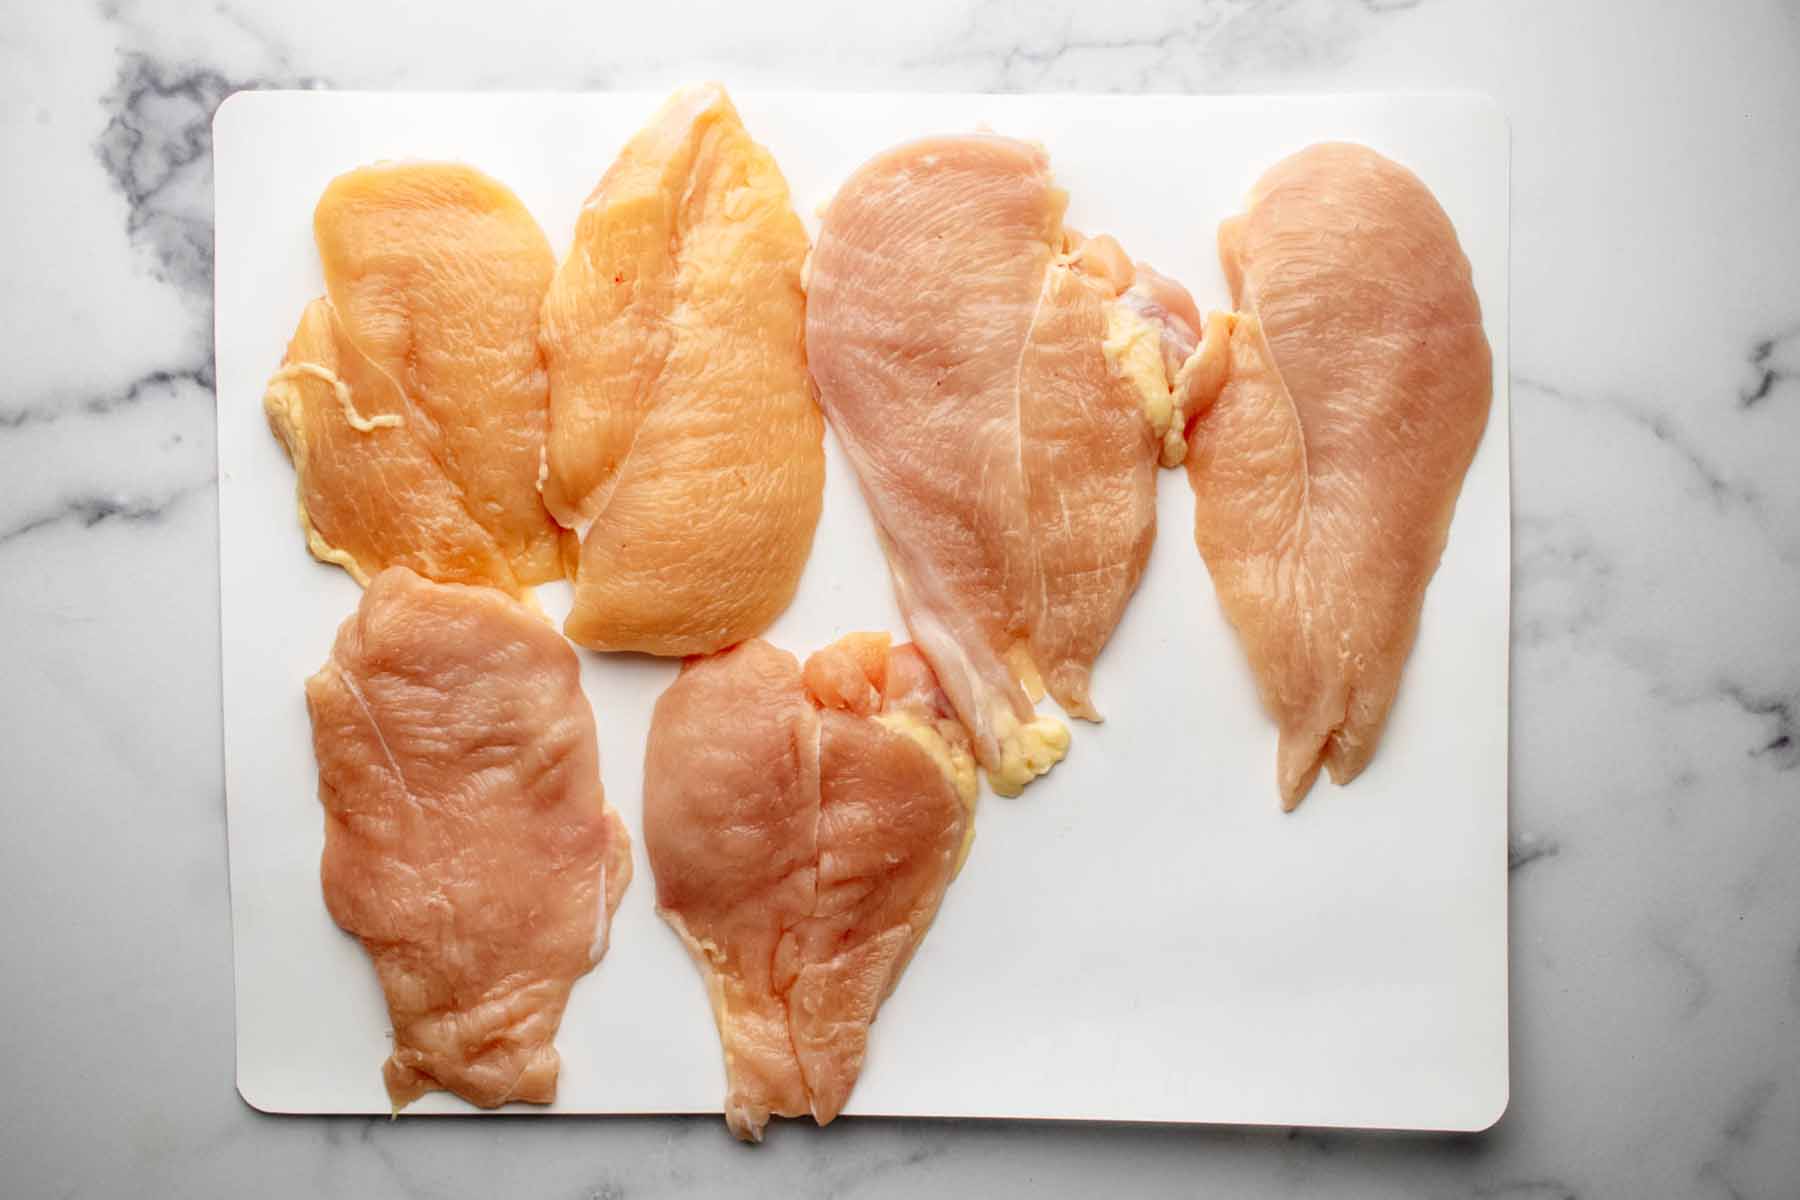 Three large chicken breasts split in half lengthwise to make six chicken cutlets.